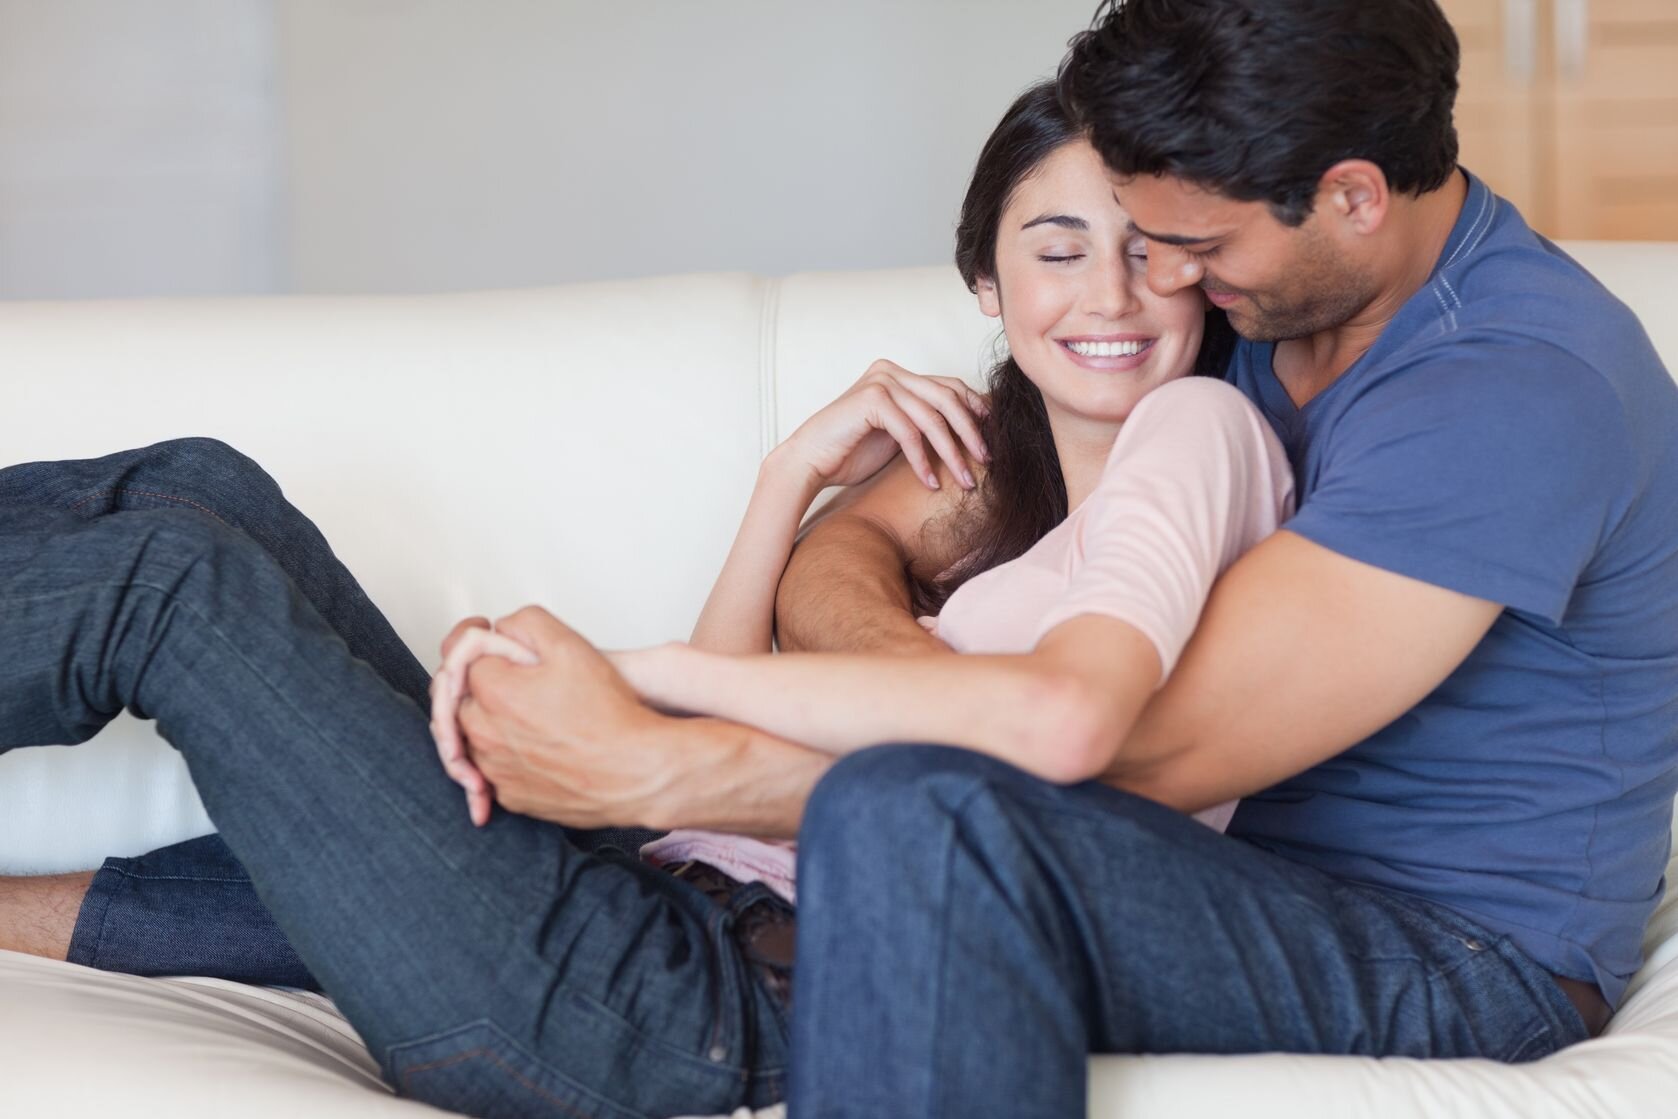 Couples Intensives and Intimacy Building Retreats — San Francisco Intimacy and Sex Therapy Centers Leading Sex and Couples Therapists/ Coaches in SF Bay Area Over 60 Locations